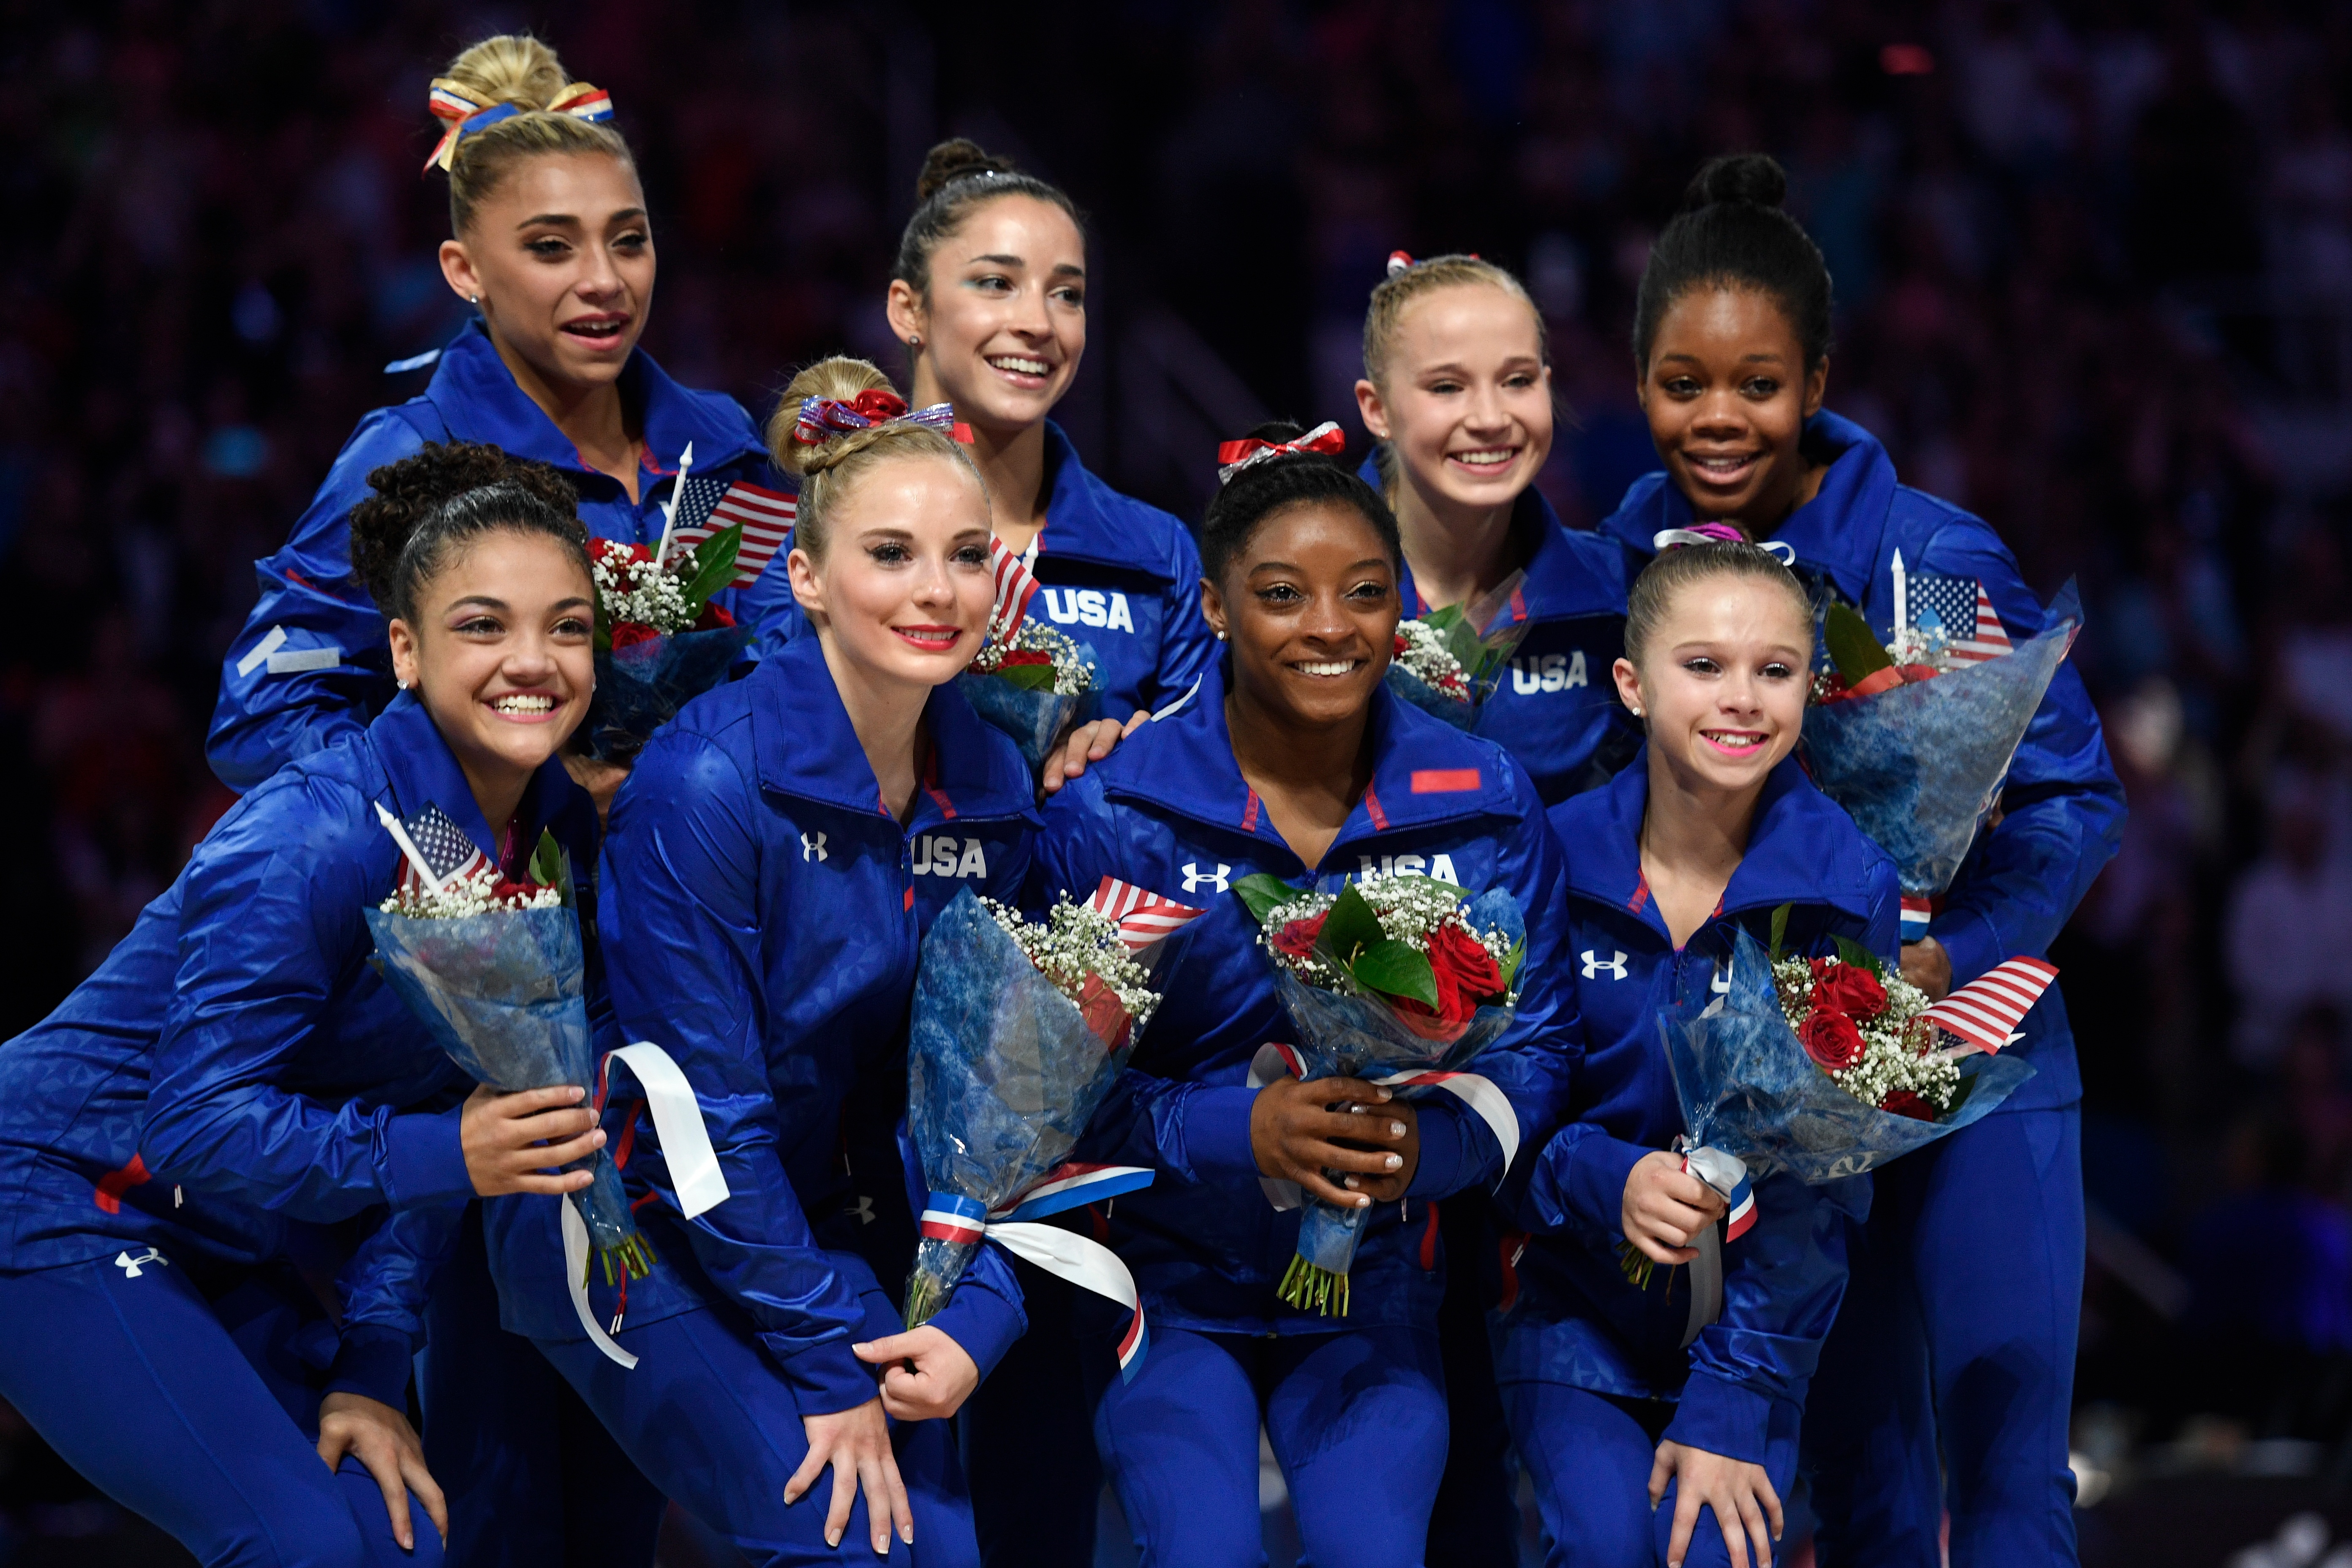 Armour: Little drama in picking women's gymnastics team for Rio Olympics